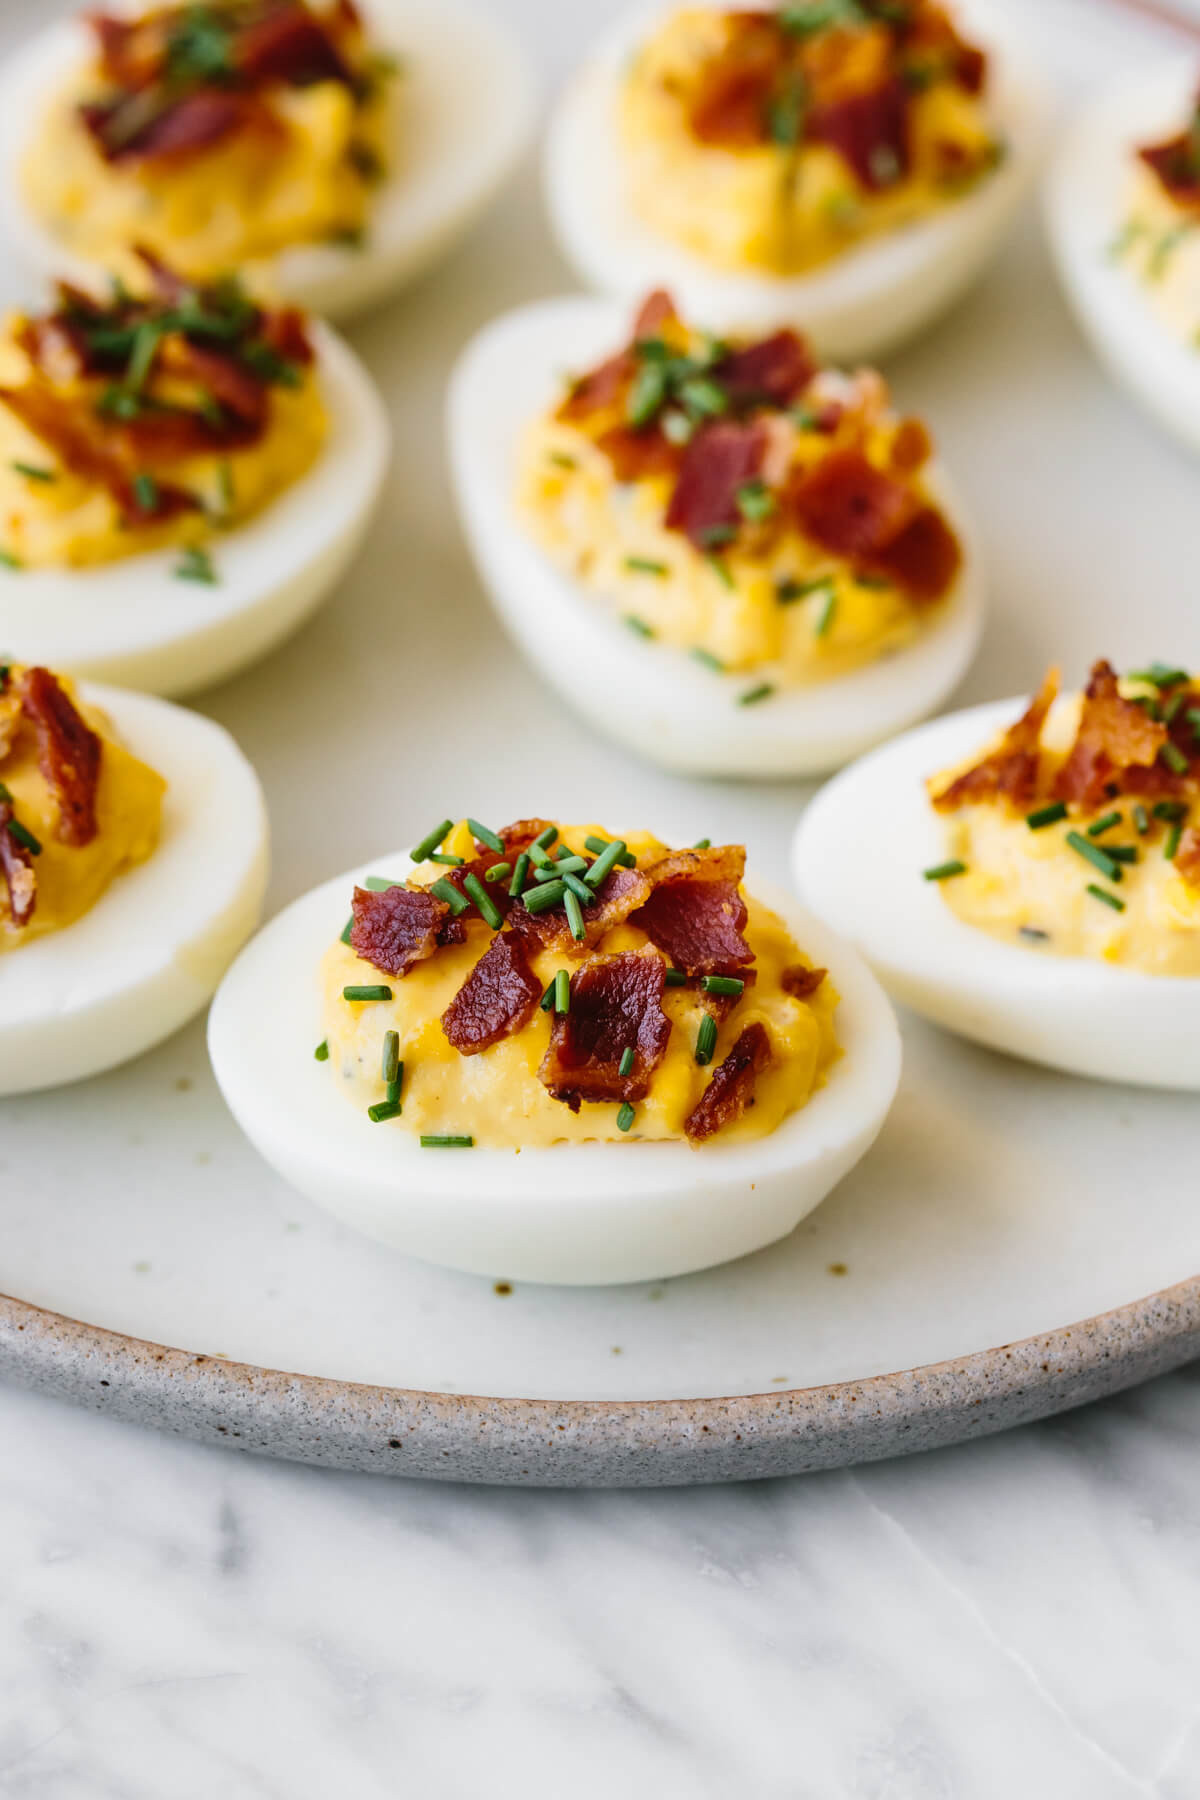 Deviled Eggs Recipe with Bacon Beautiful Bacon Deviled Eggs How to Make Deviled Eggs with Bacon